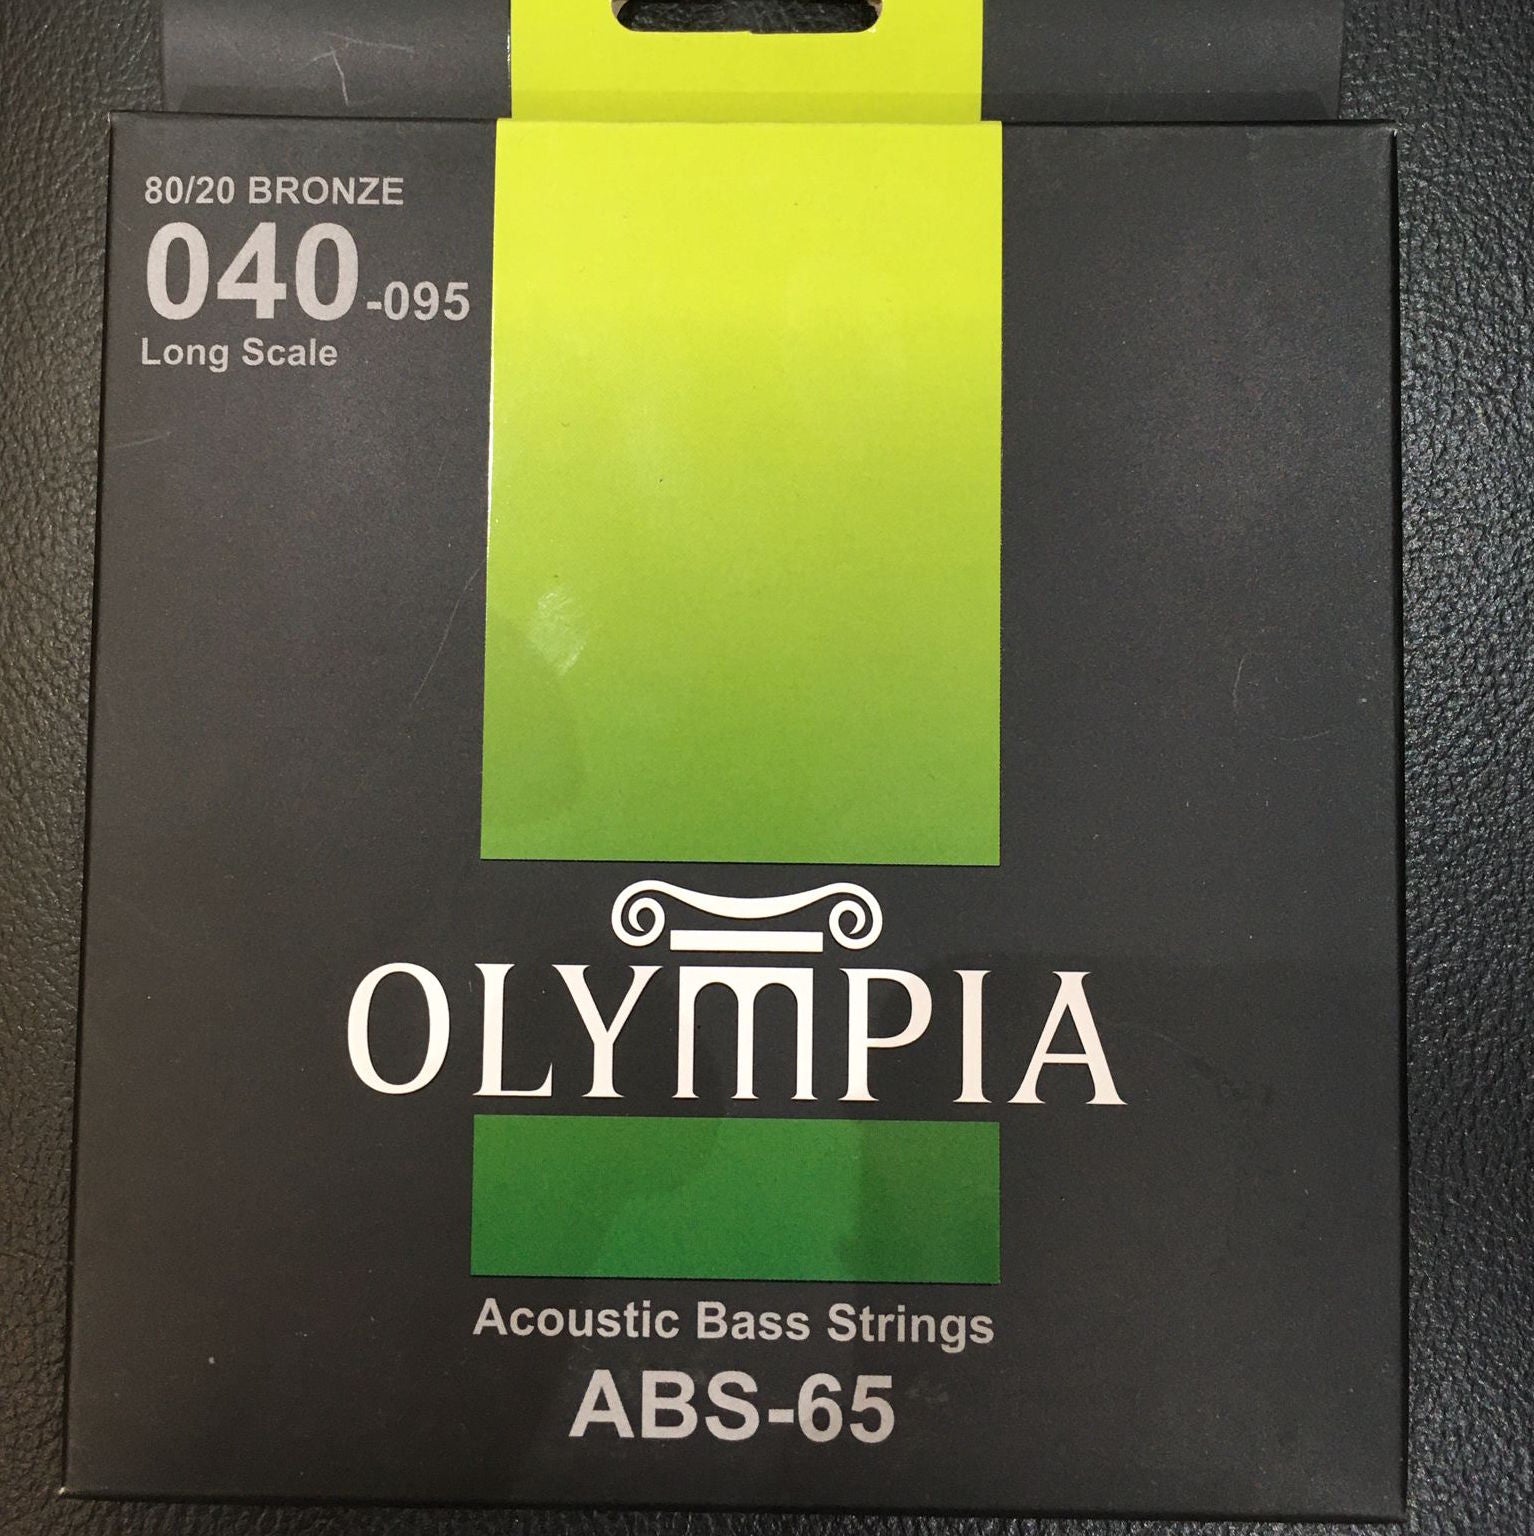 Olympia ABS 65 Acoustic Bass Strings (040-095) 80/20 Bronze